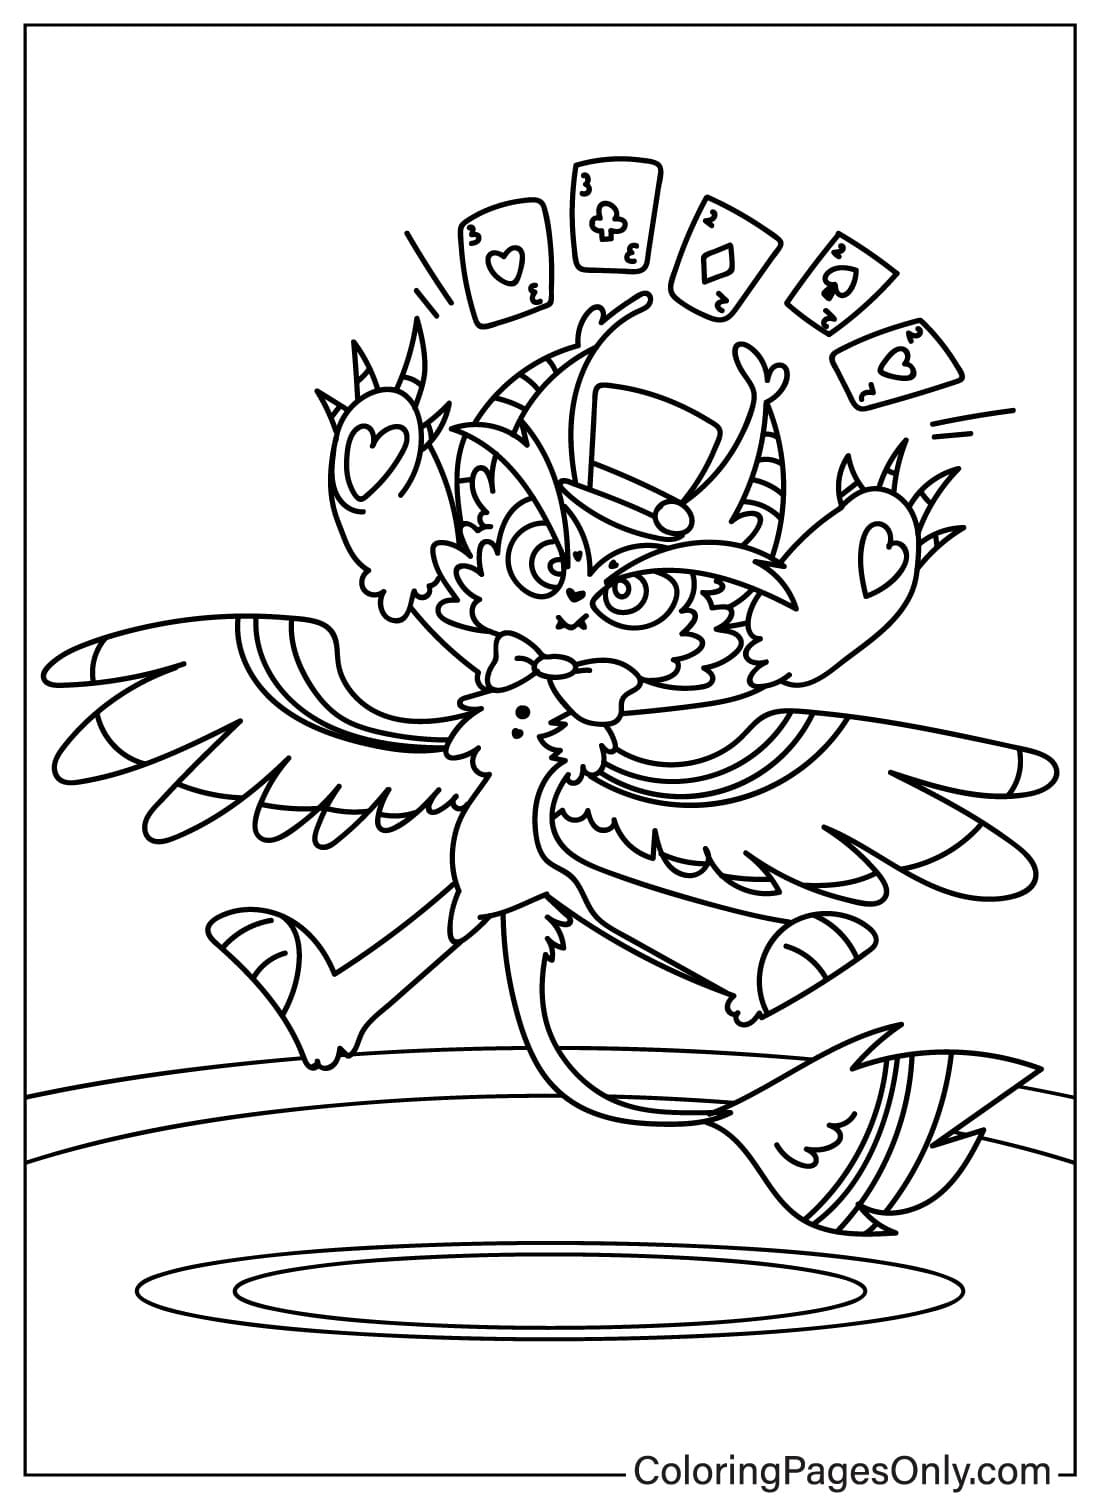 Husk Cute Coloring Page from Husk